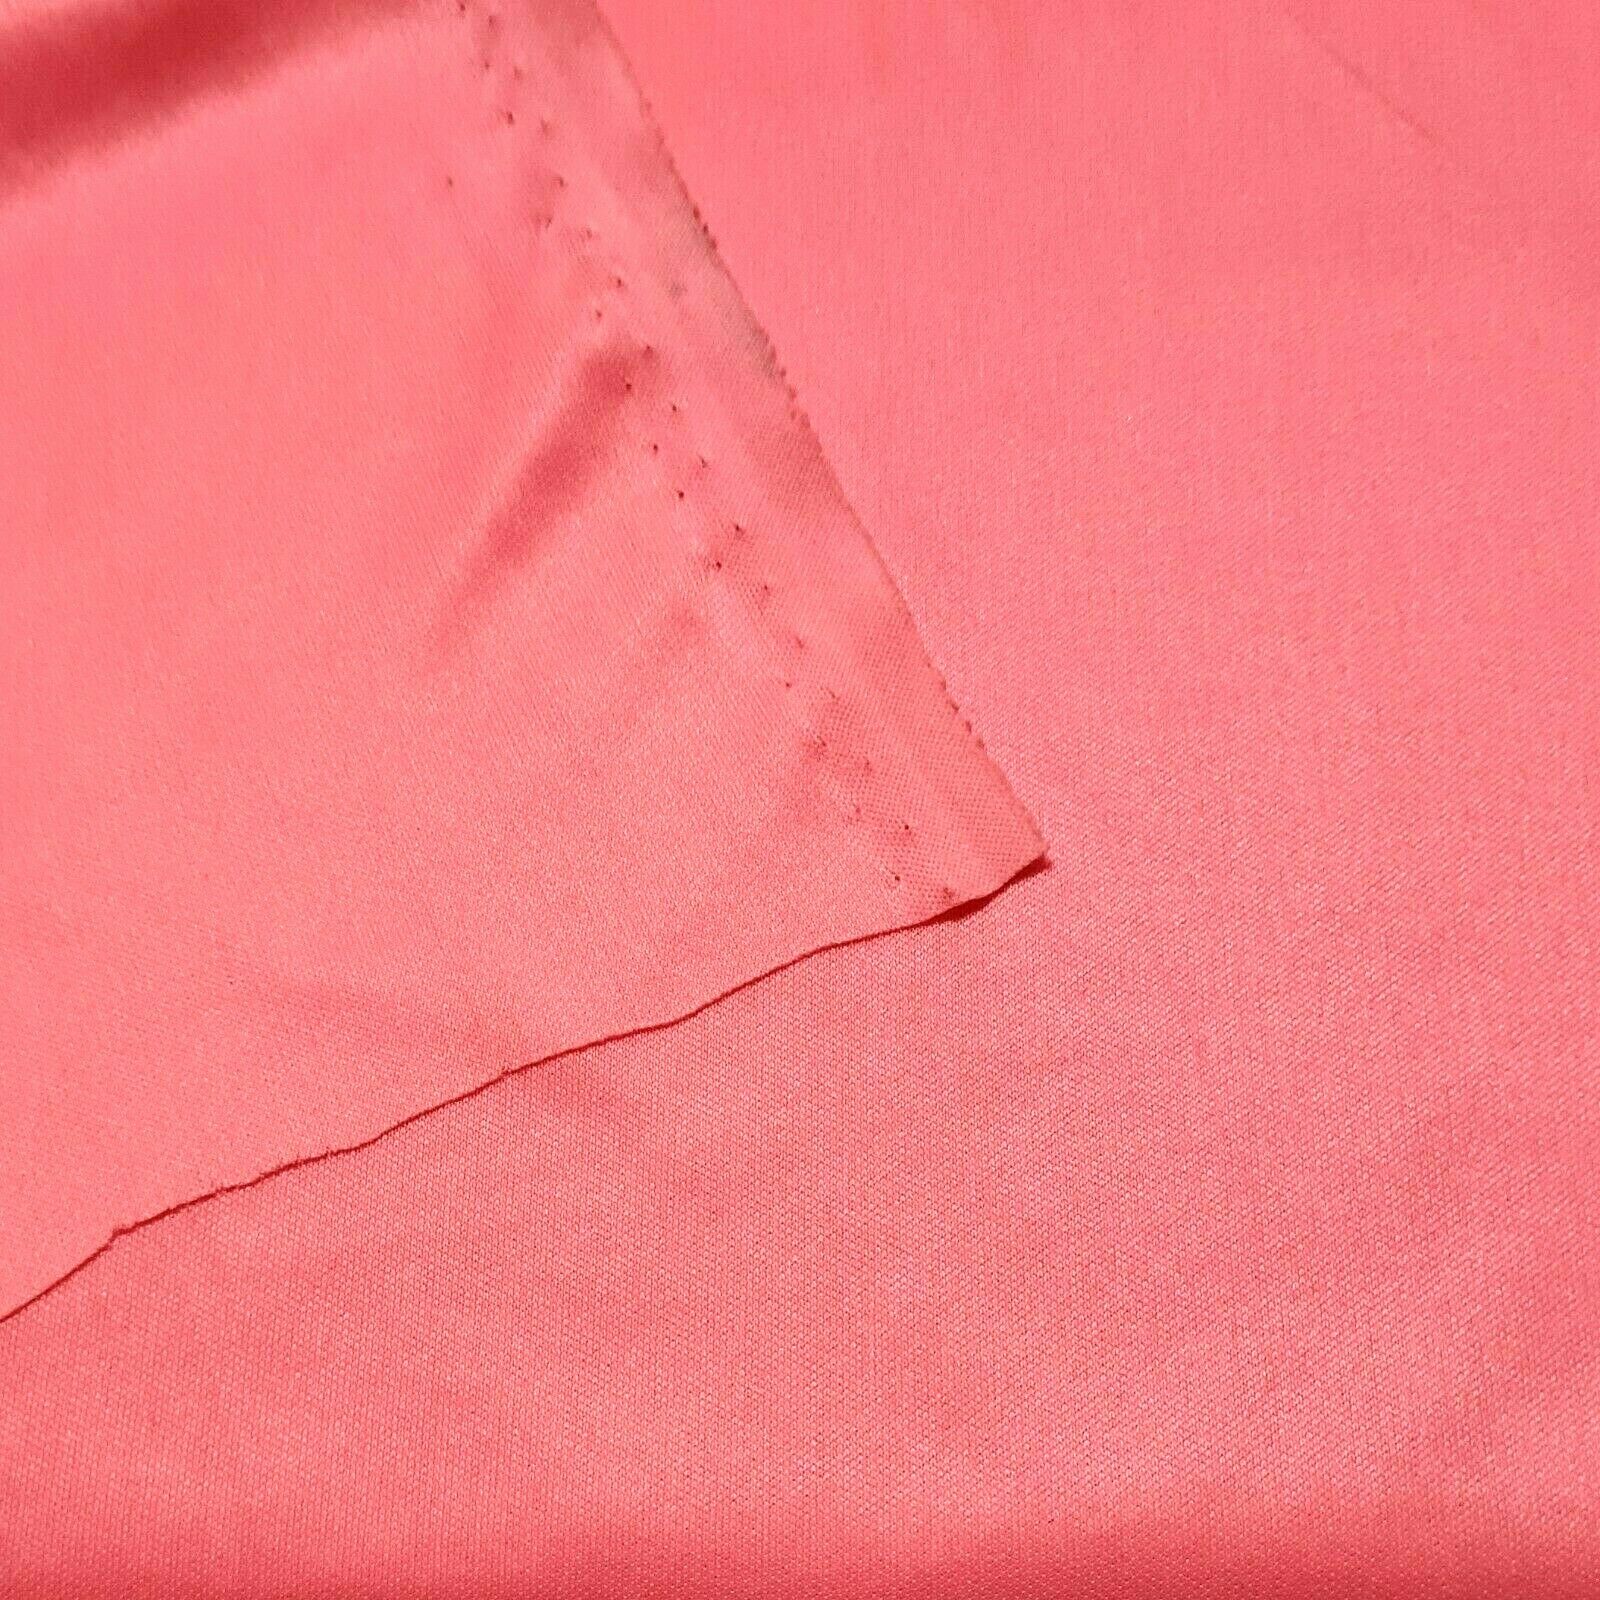 Polyester Knit Lining in Hot Pink